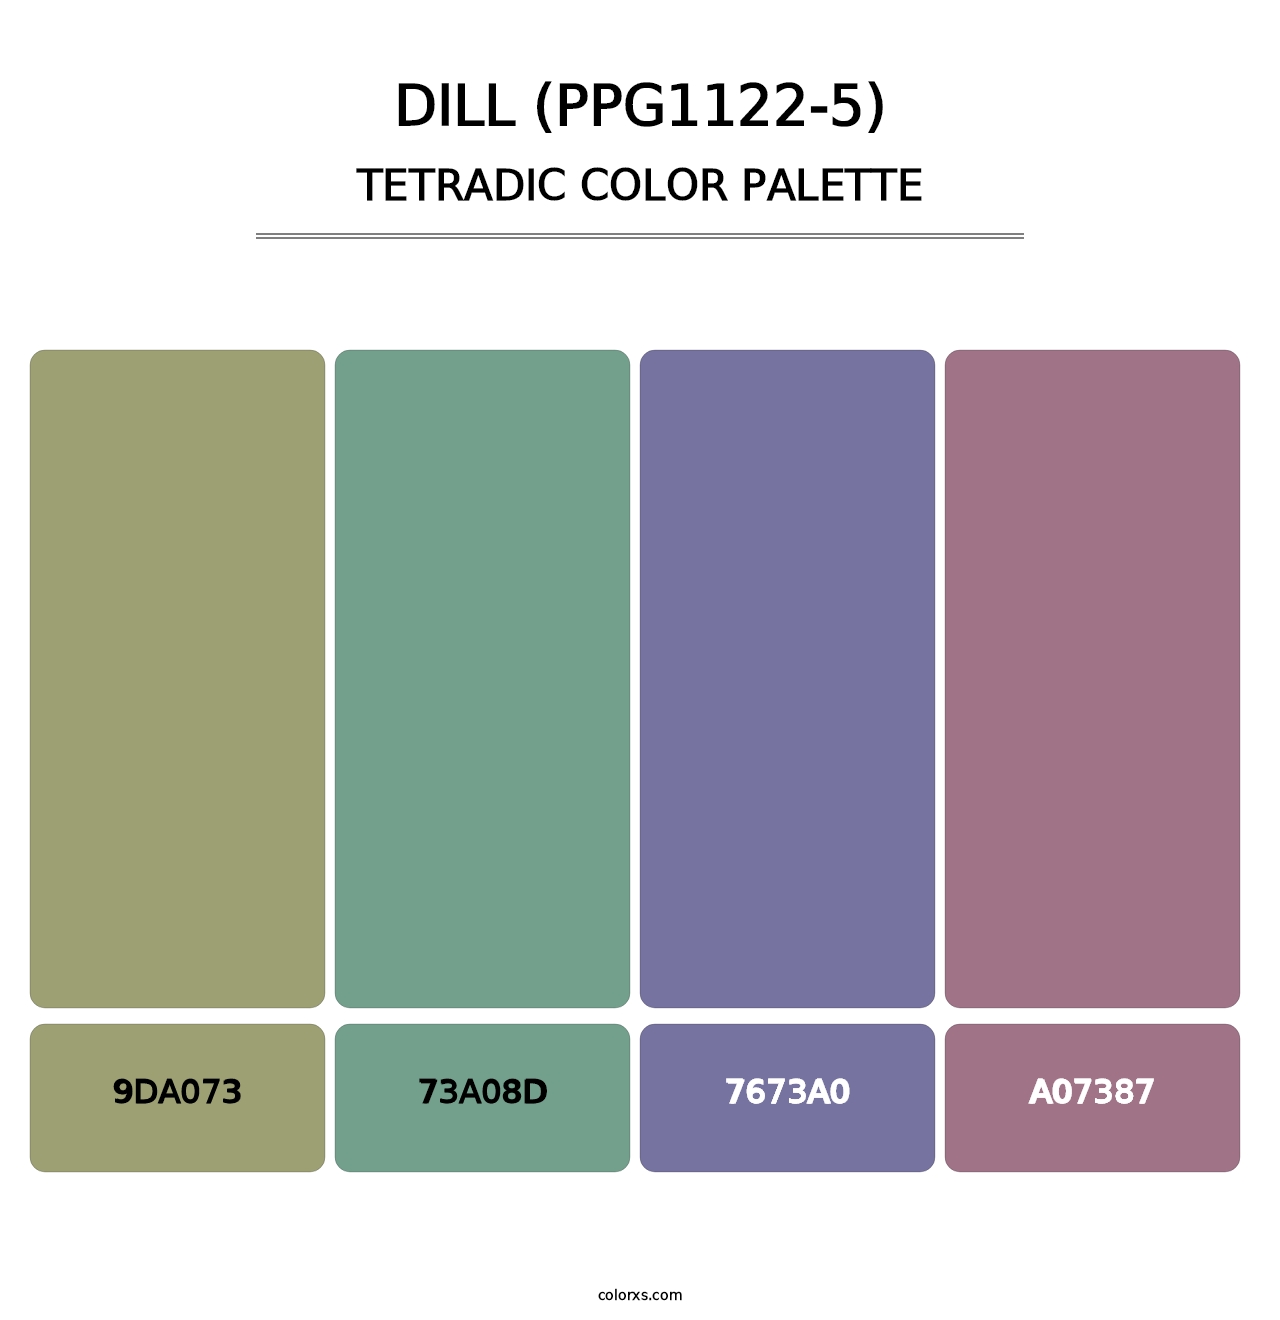 Dill (PPG1122-5) - Tetradic Color Palette